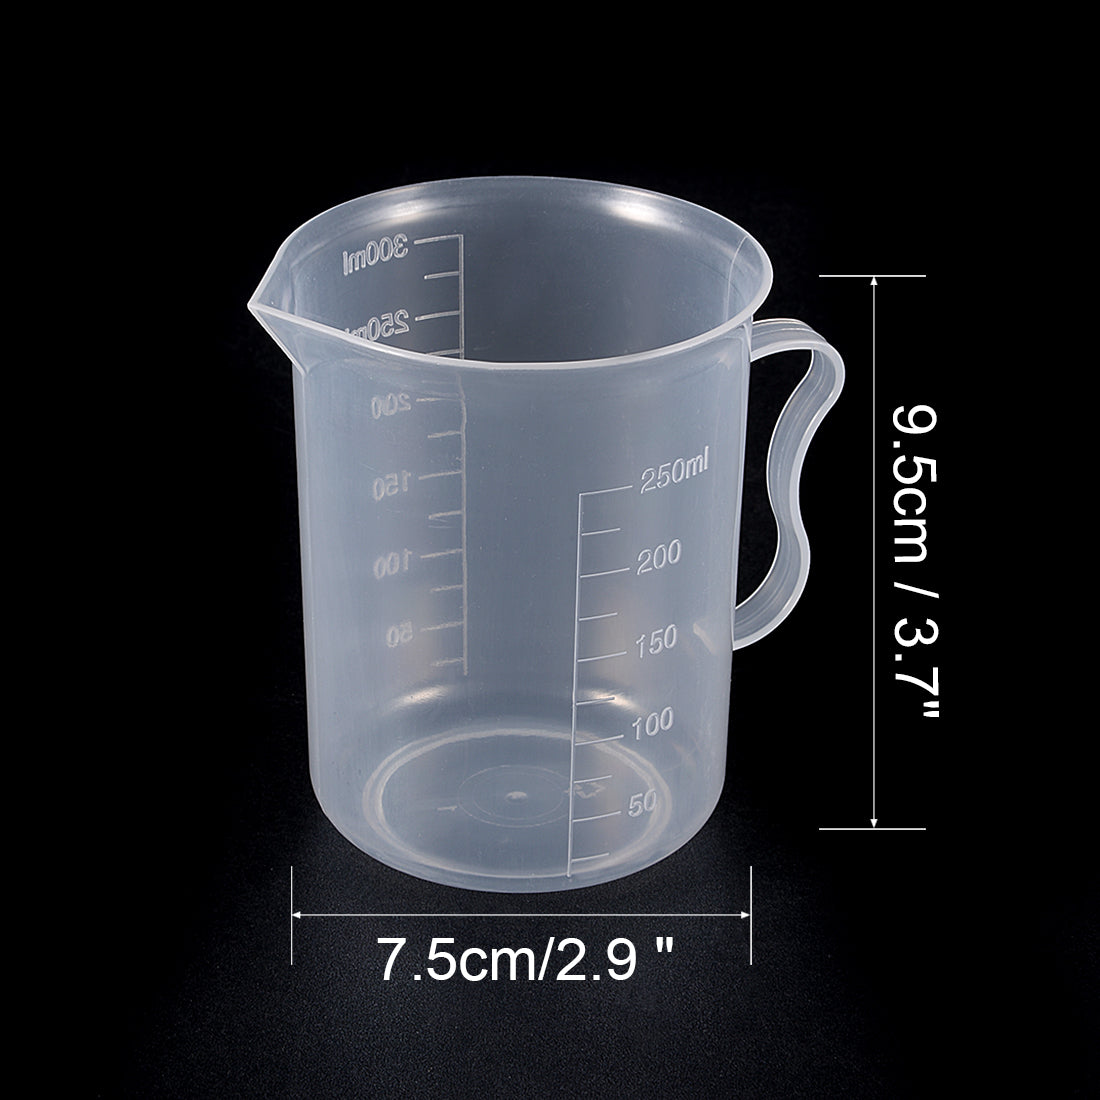 uxcell Uxcell Laboratory Clear White PP 300mL Measuring Cup Handled Beaker